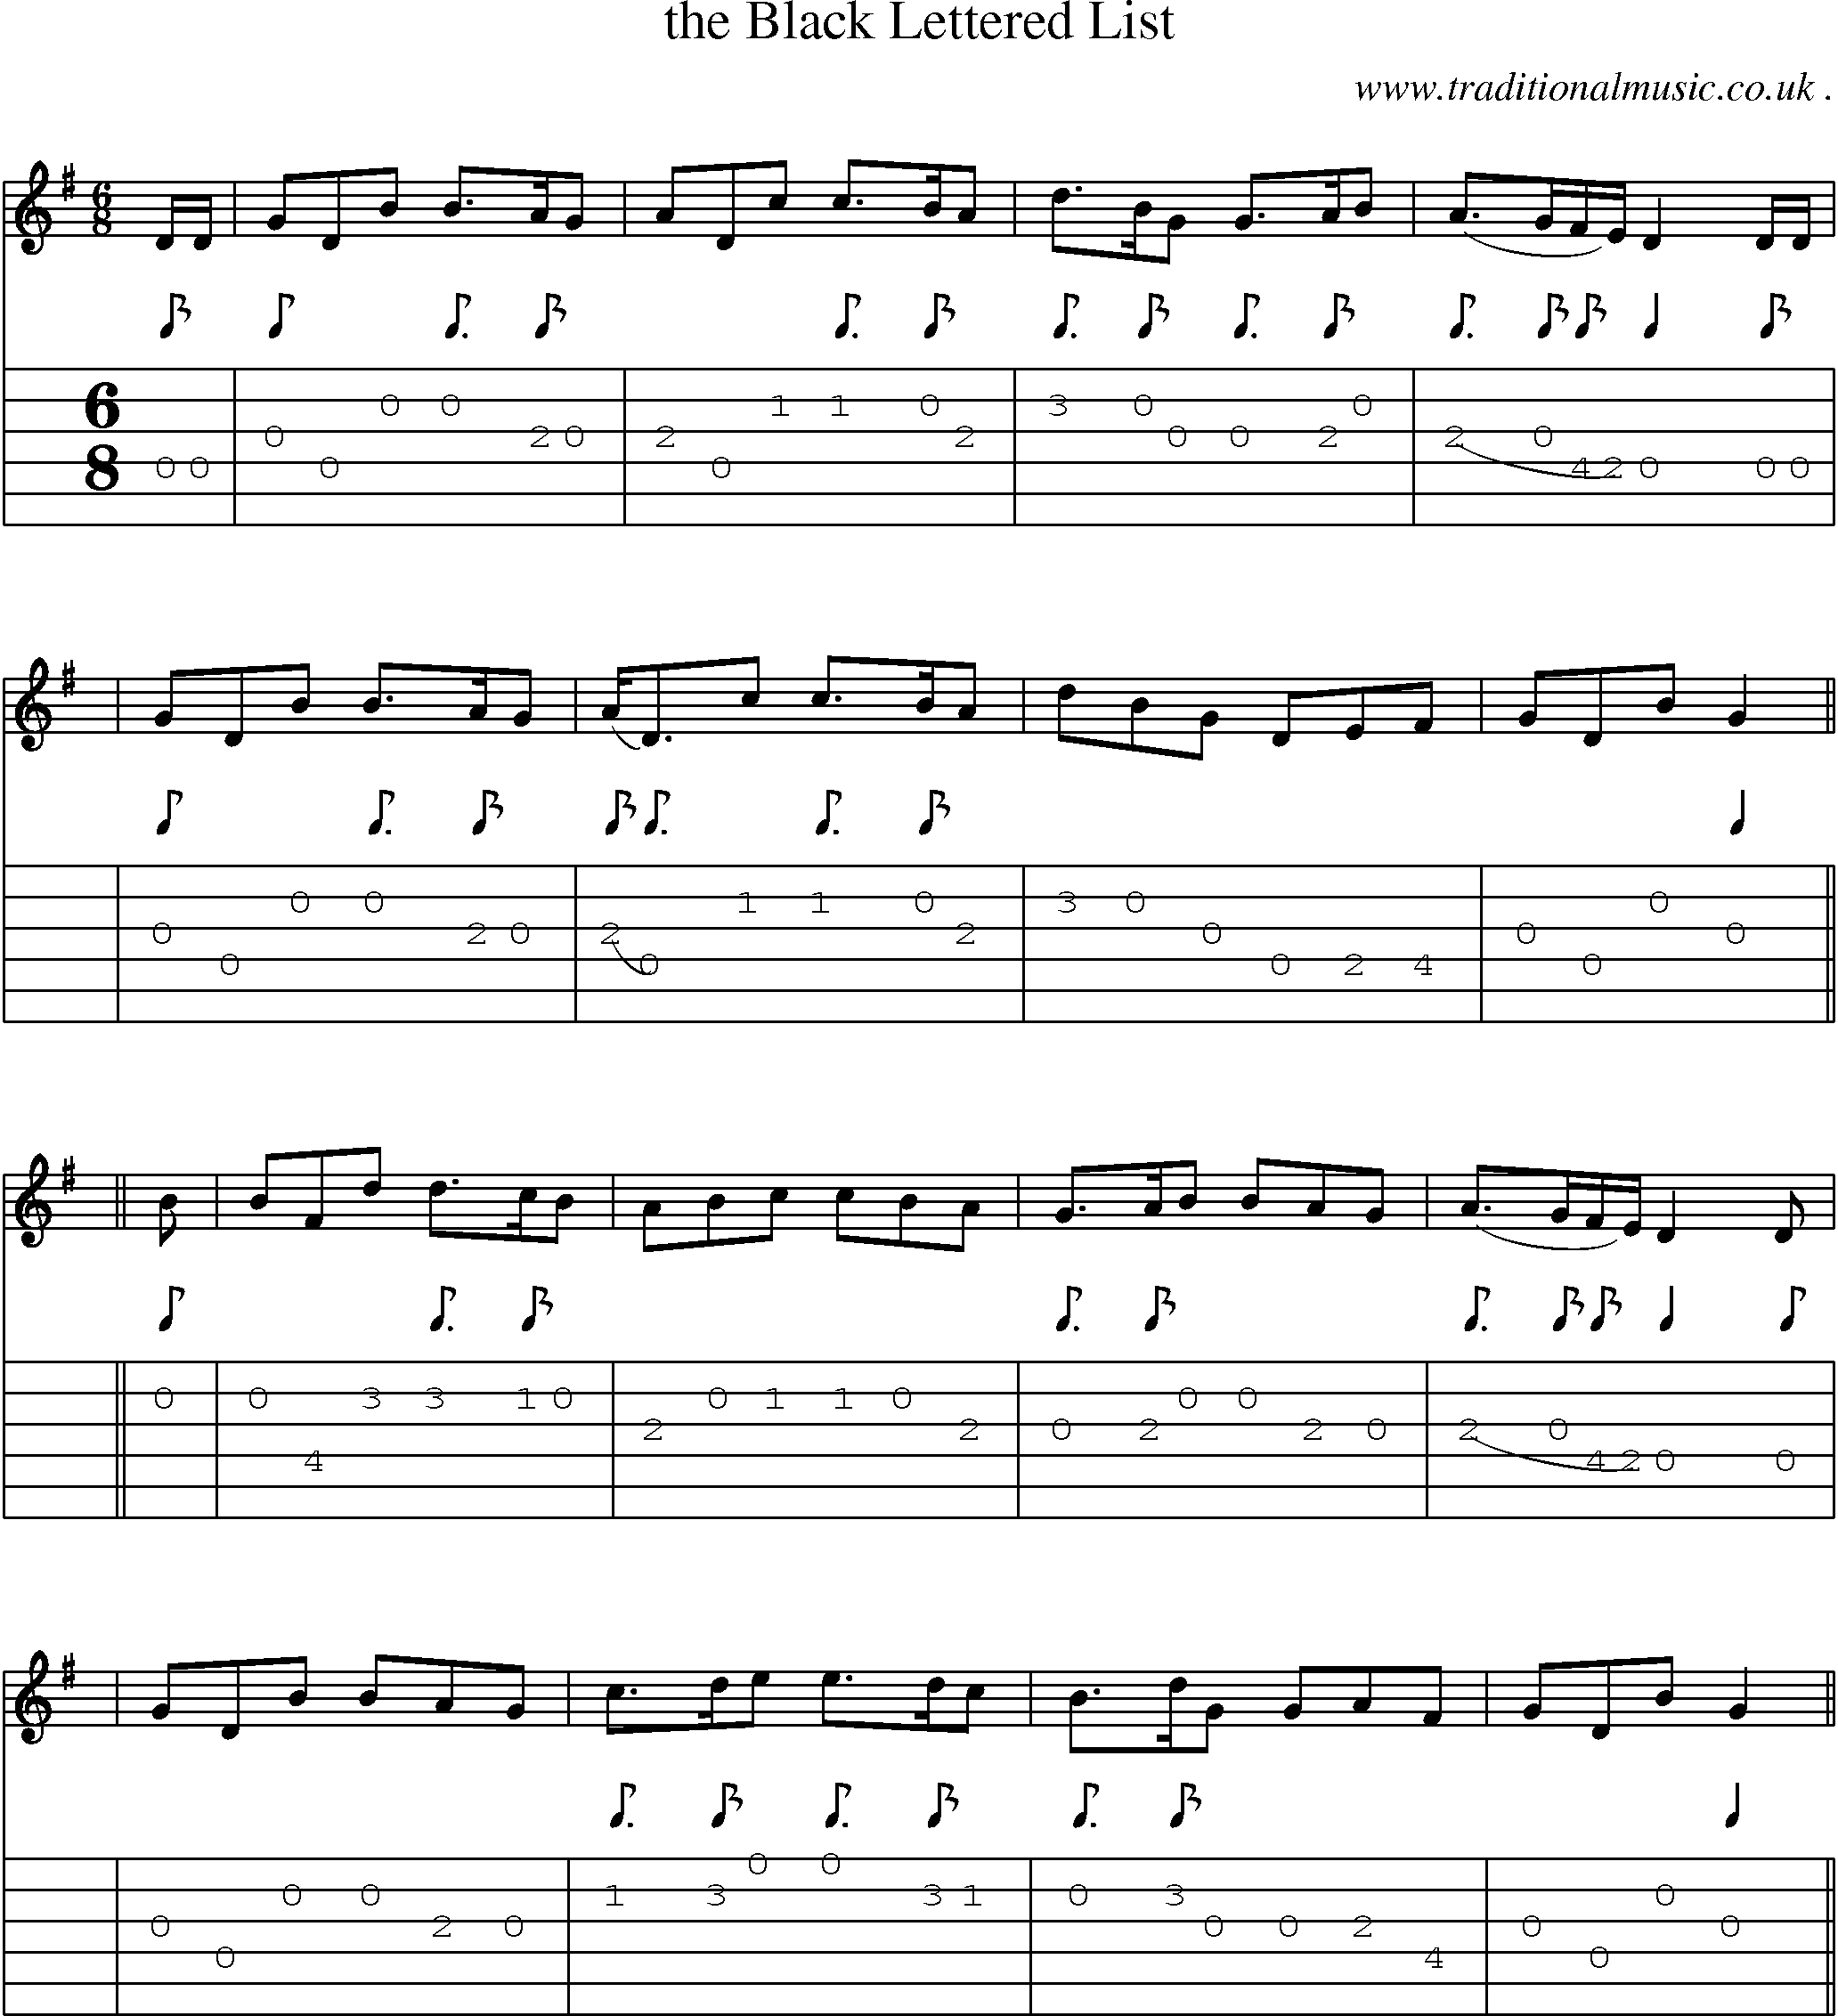 Sheet-music  score, Chords and Guitar Tabs for The Black Lettered List